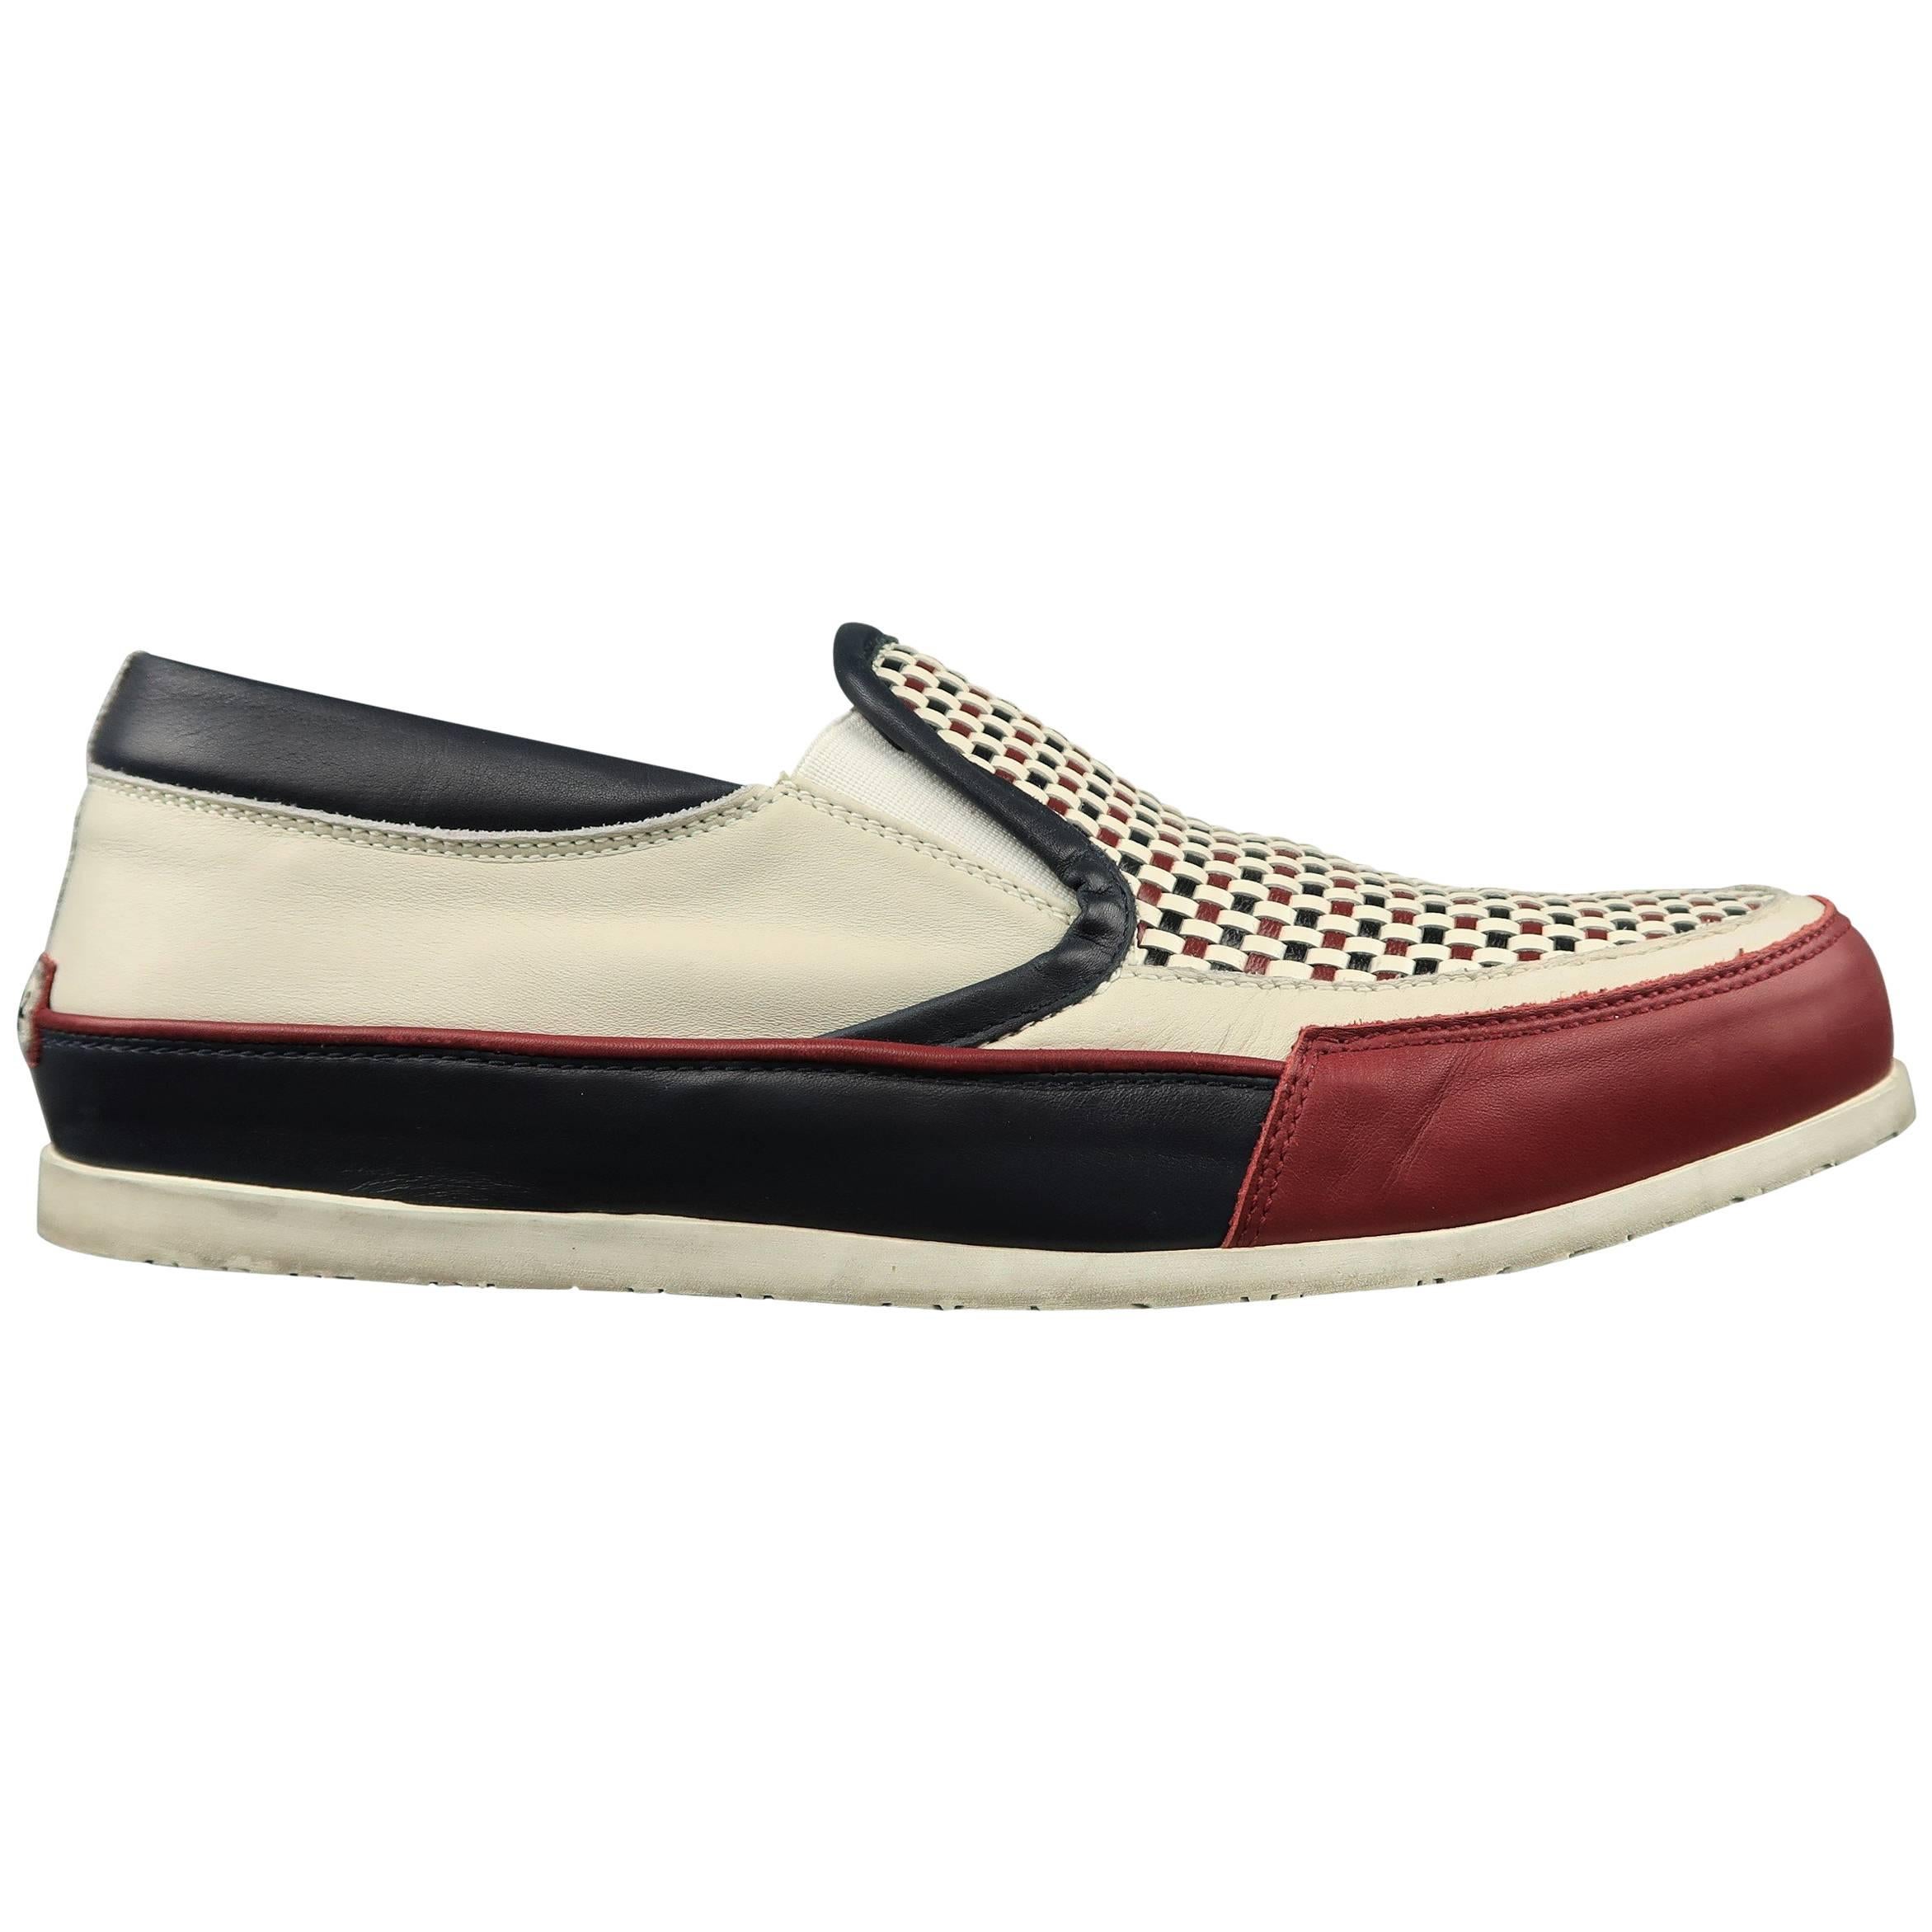 Men's DSQUARED2 Size 12 Red White & Blue Woven Leather Slip On Sneakers